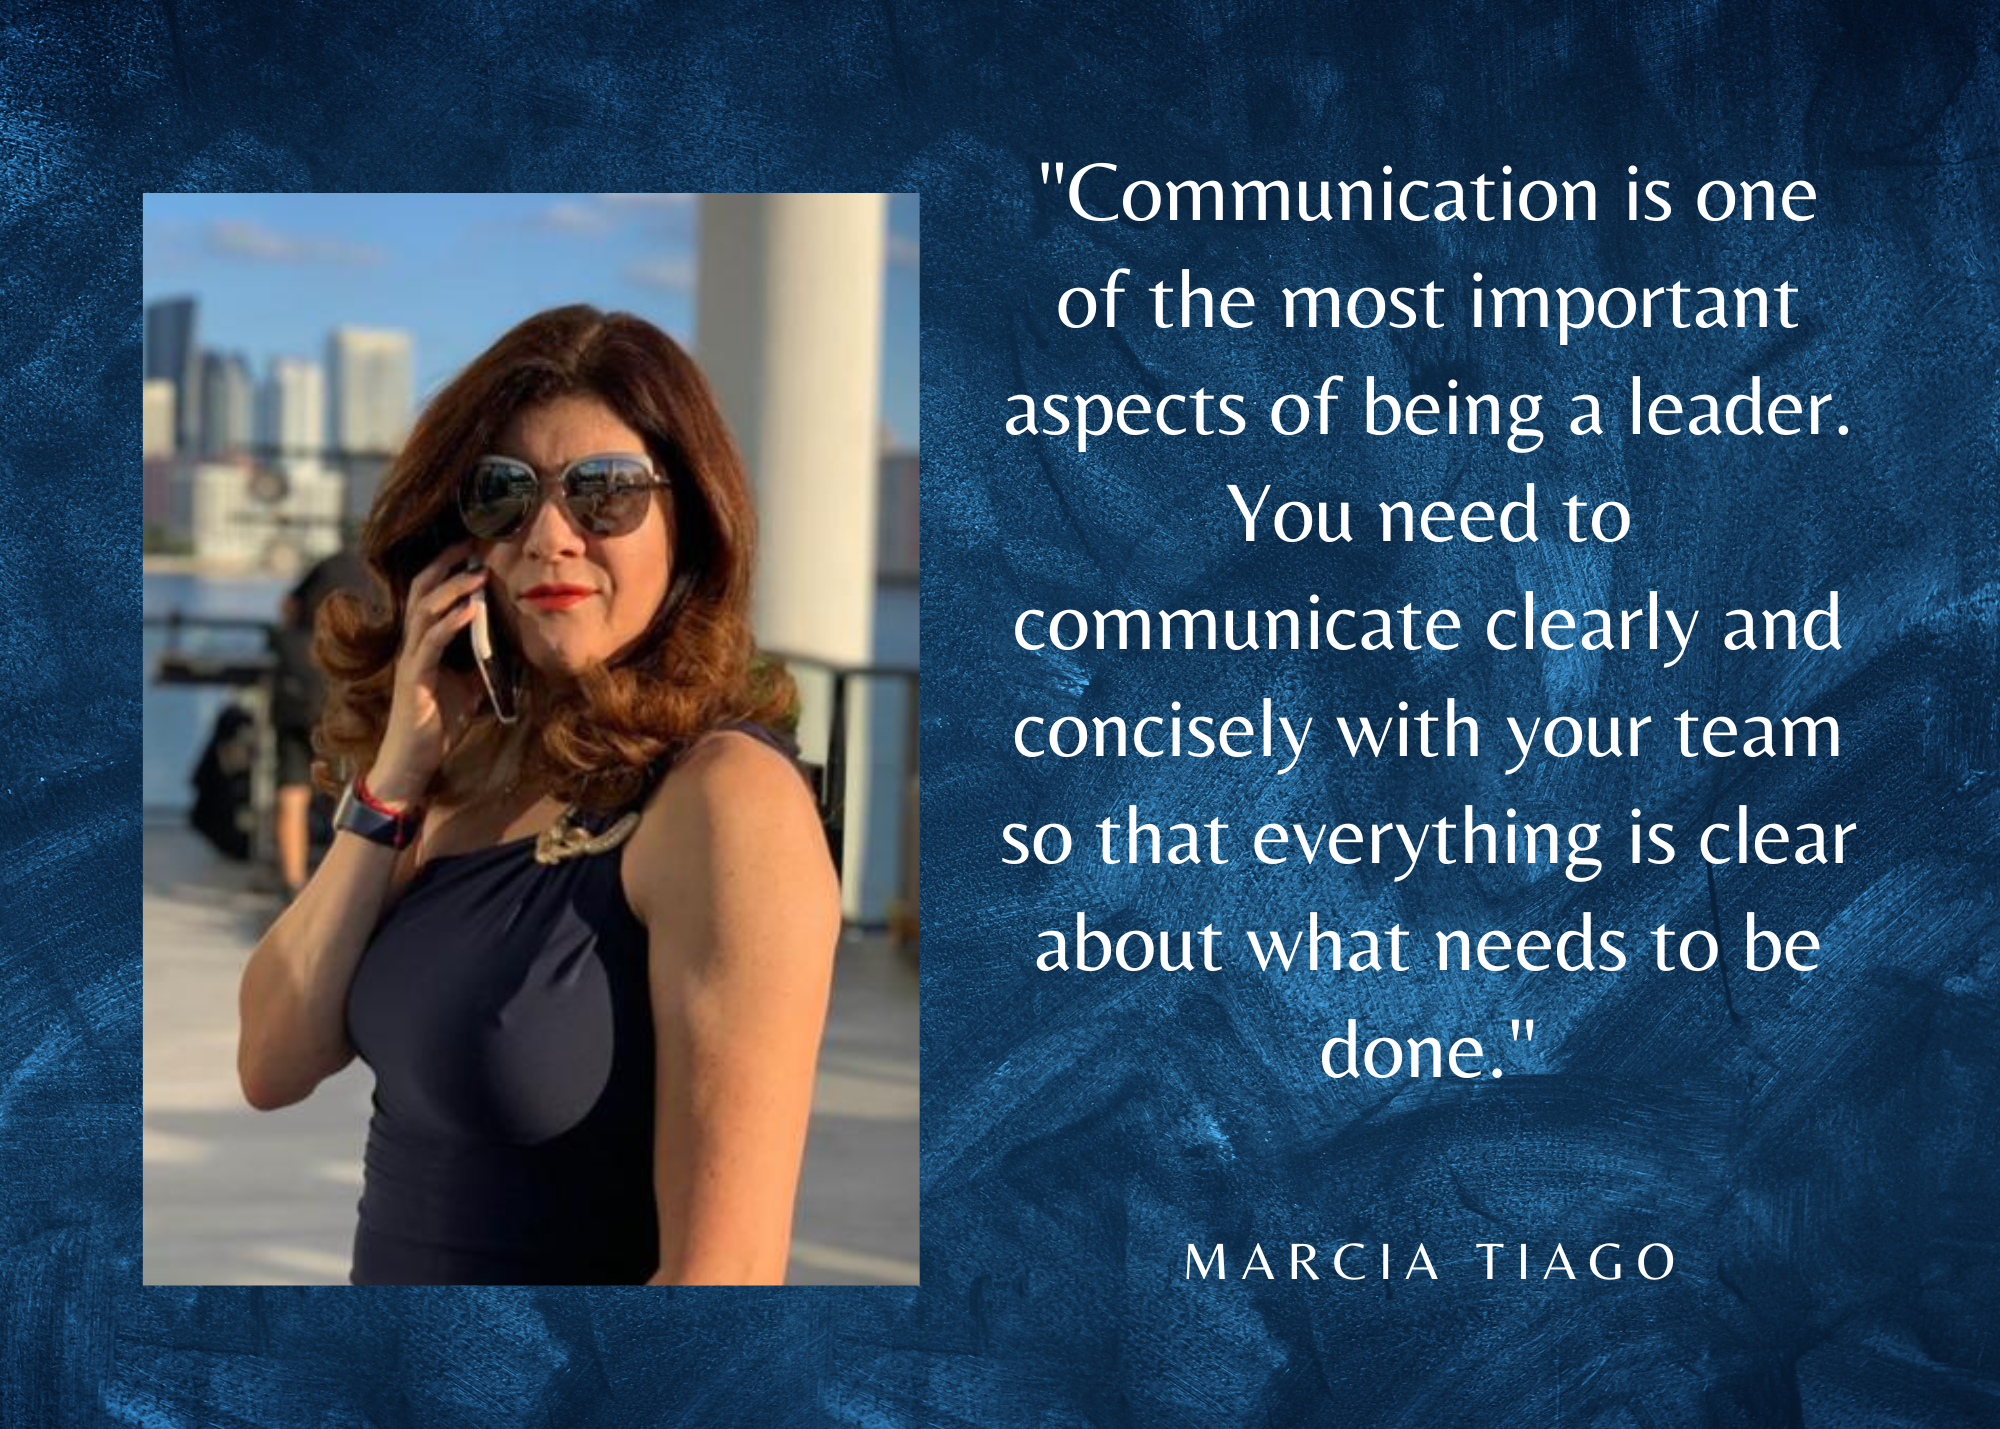 Marcia Taigo, Multimedia and Telecommunications Industry Executive, Co-Authors a New Article